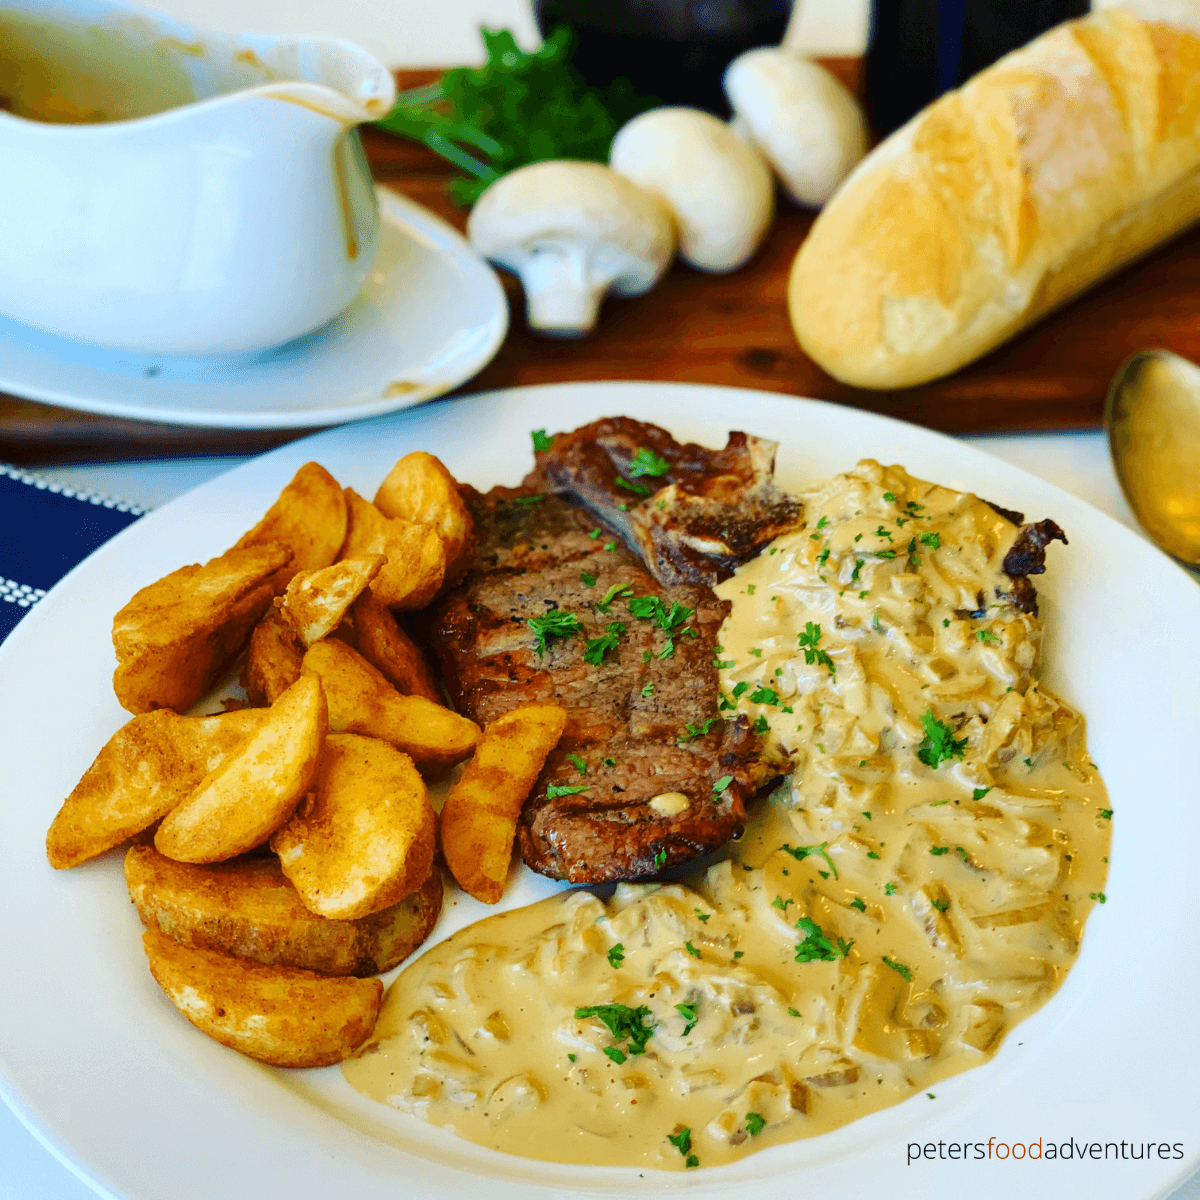 Diane Sauce is a creamy brandy steak sauce or mushroom gravy, with an easy to follow recipe. A classic American flambéed steak sauce, a flavor showstopper. A retro recipe popular in the 1950's.